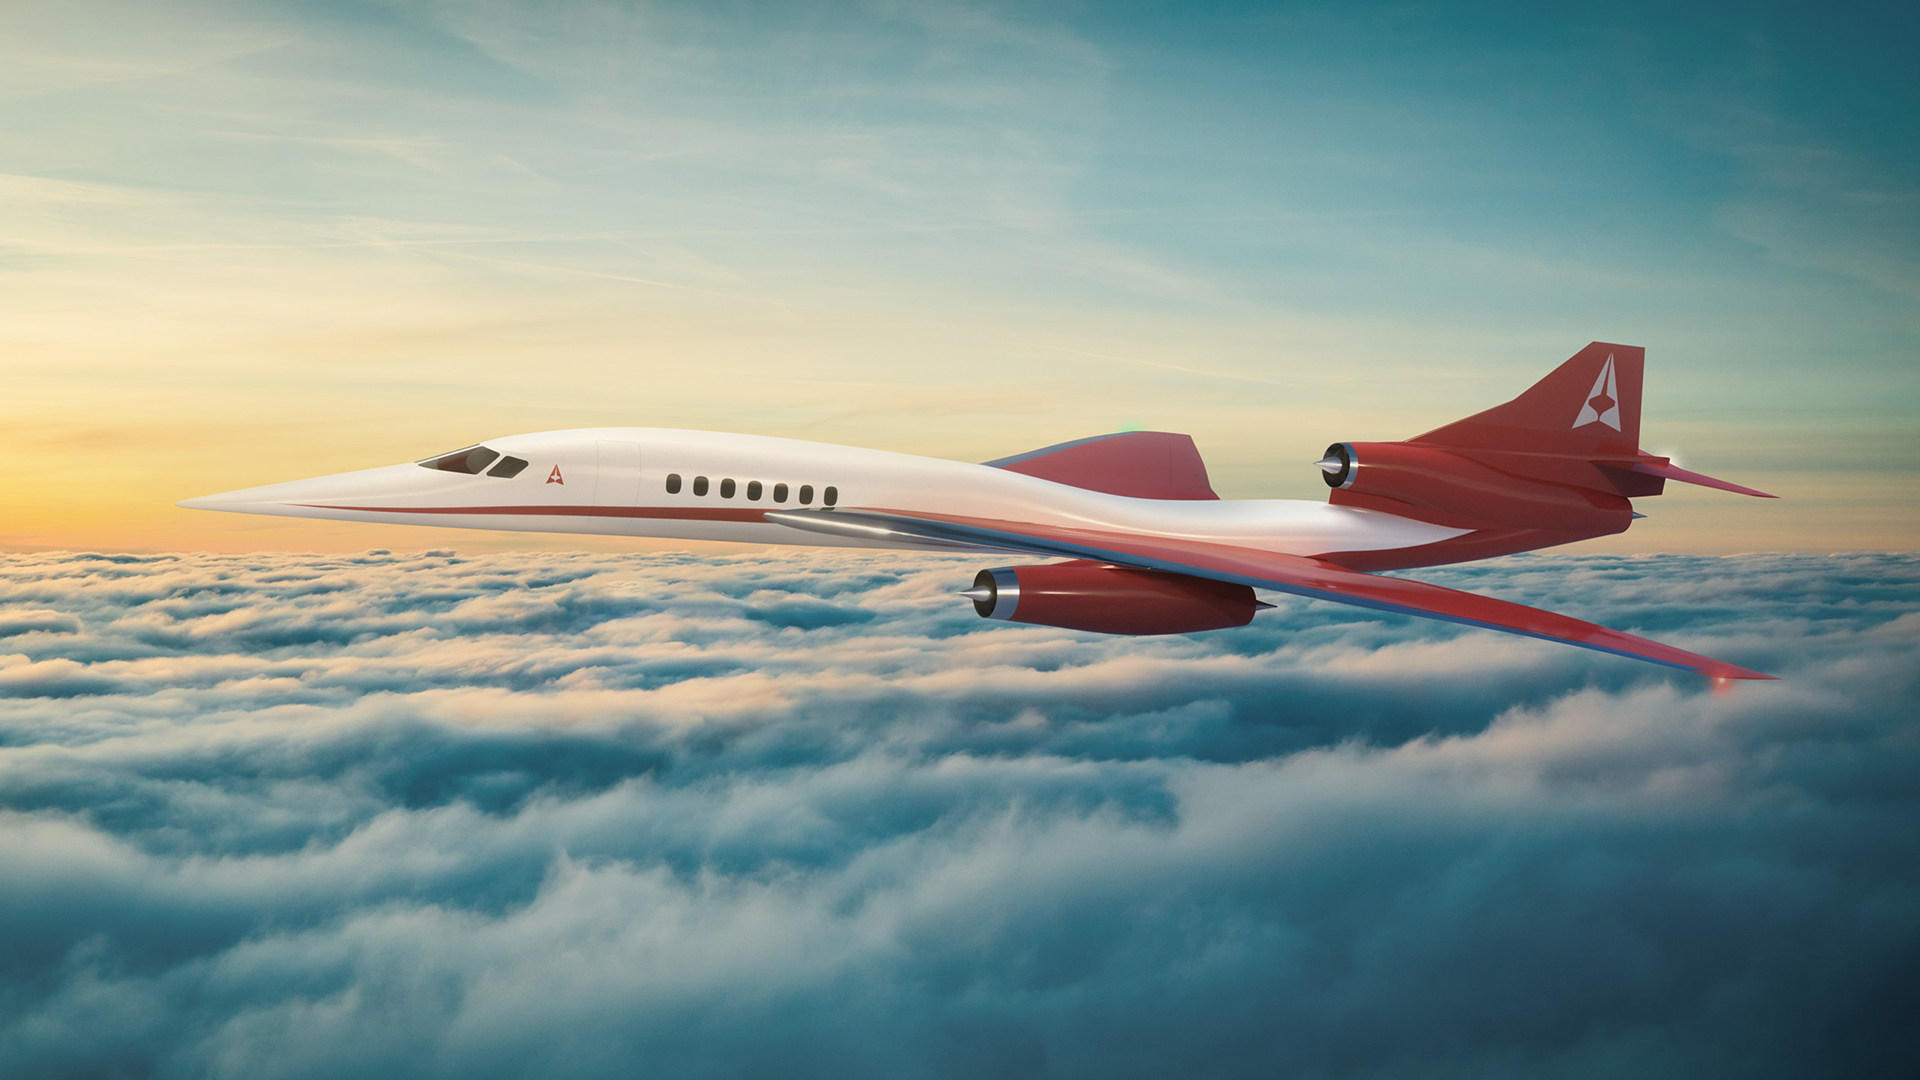 aerion-as2-netjets